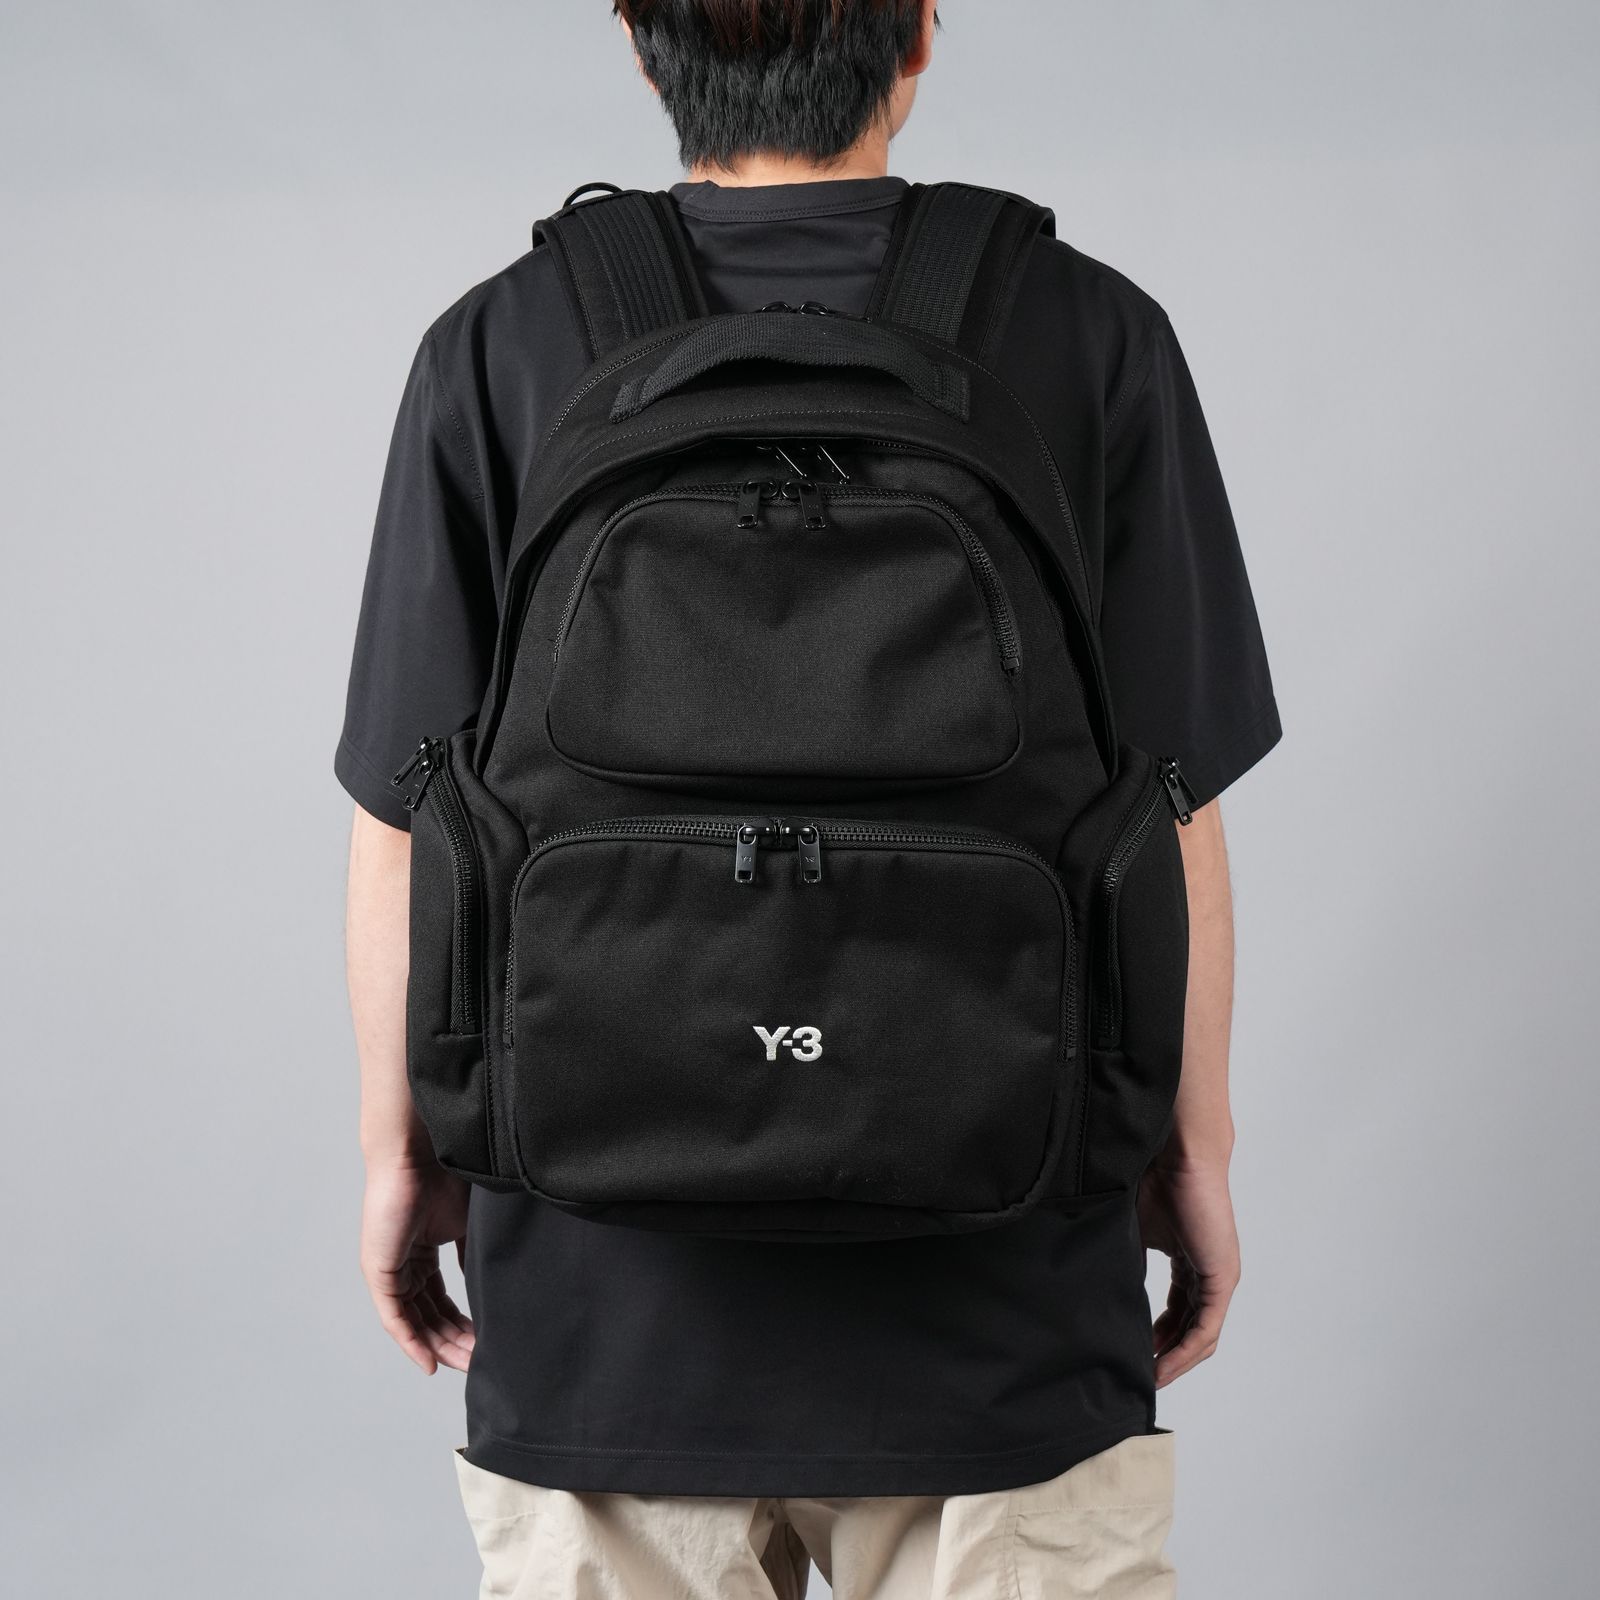 Y-3 - Y-3 BACKPACK / ワイスリー バックパック (ブラック) | Confidence